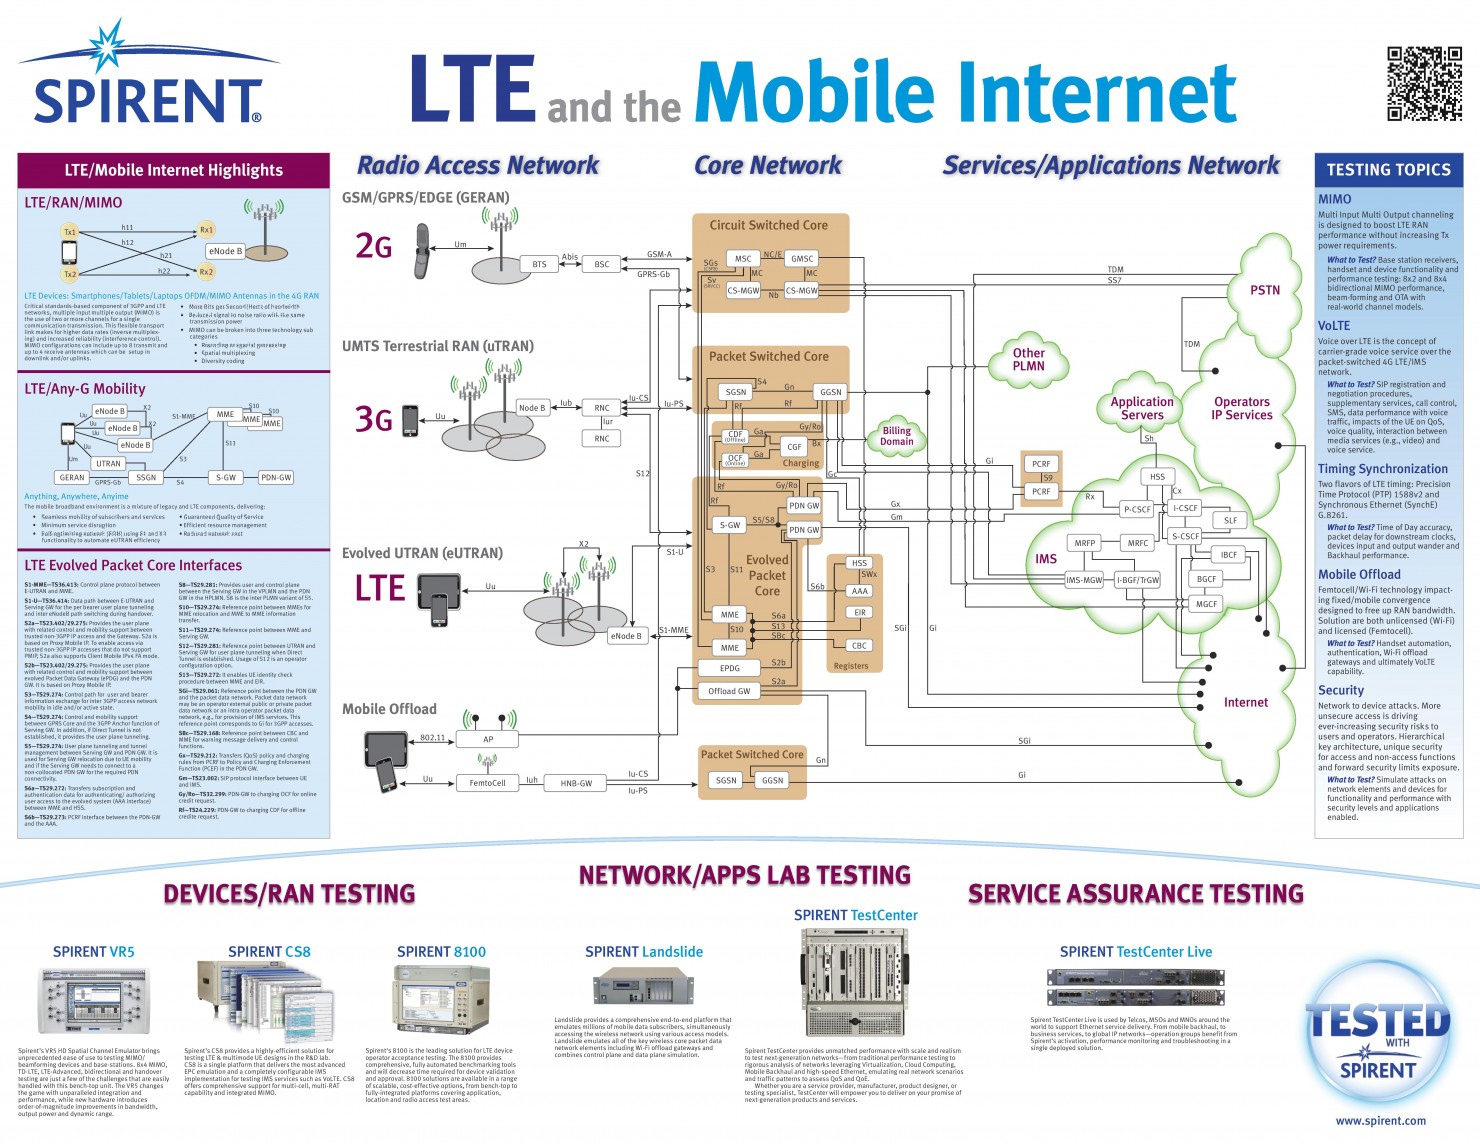 lte_and_mobile_internet_poster_print-page-001-e1364102522404.jpg